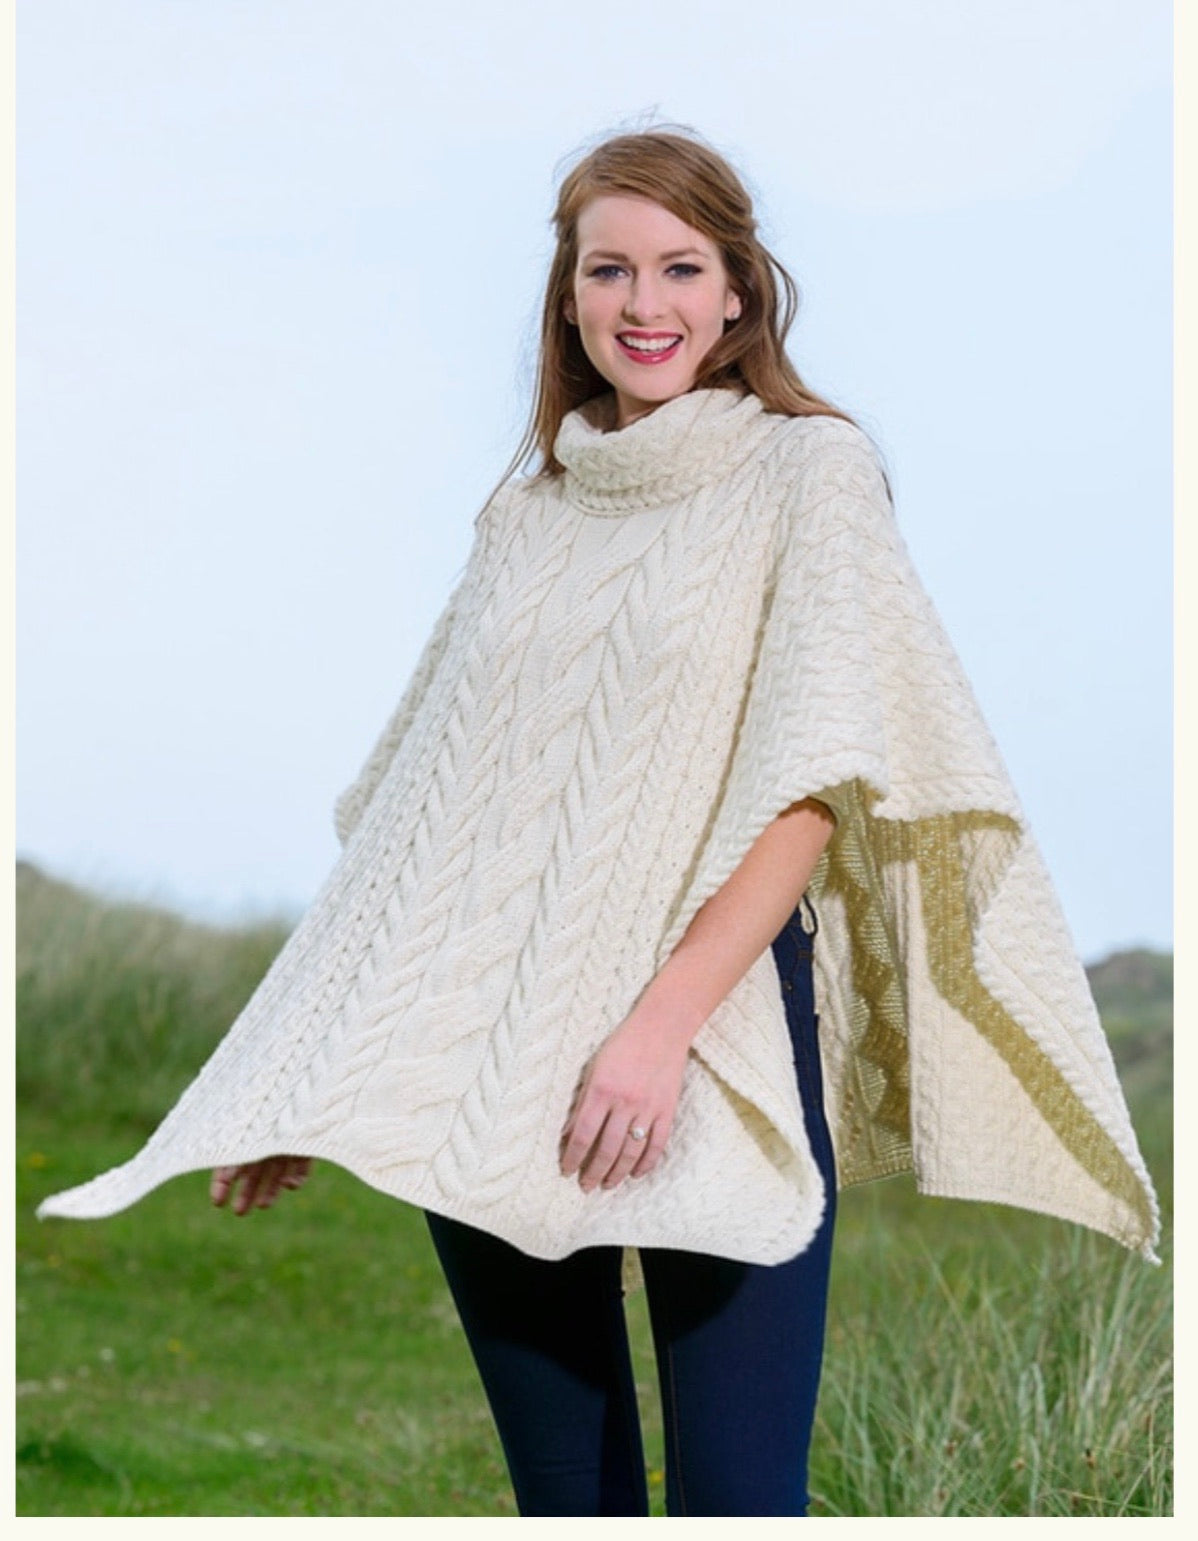 Super Soft Cowl Neck Poncho in Natural B694 (one size)